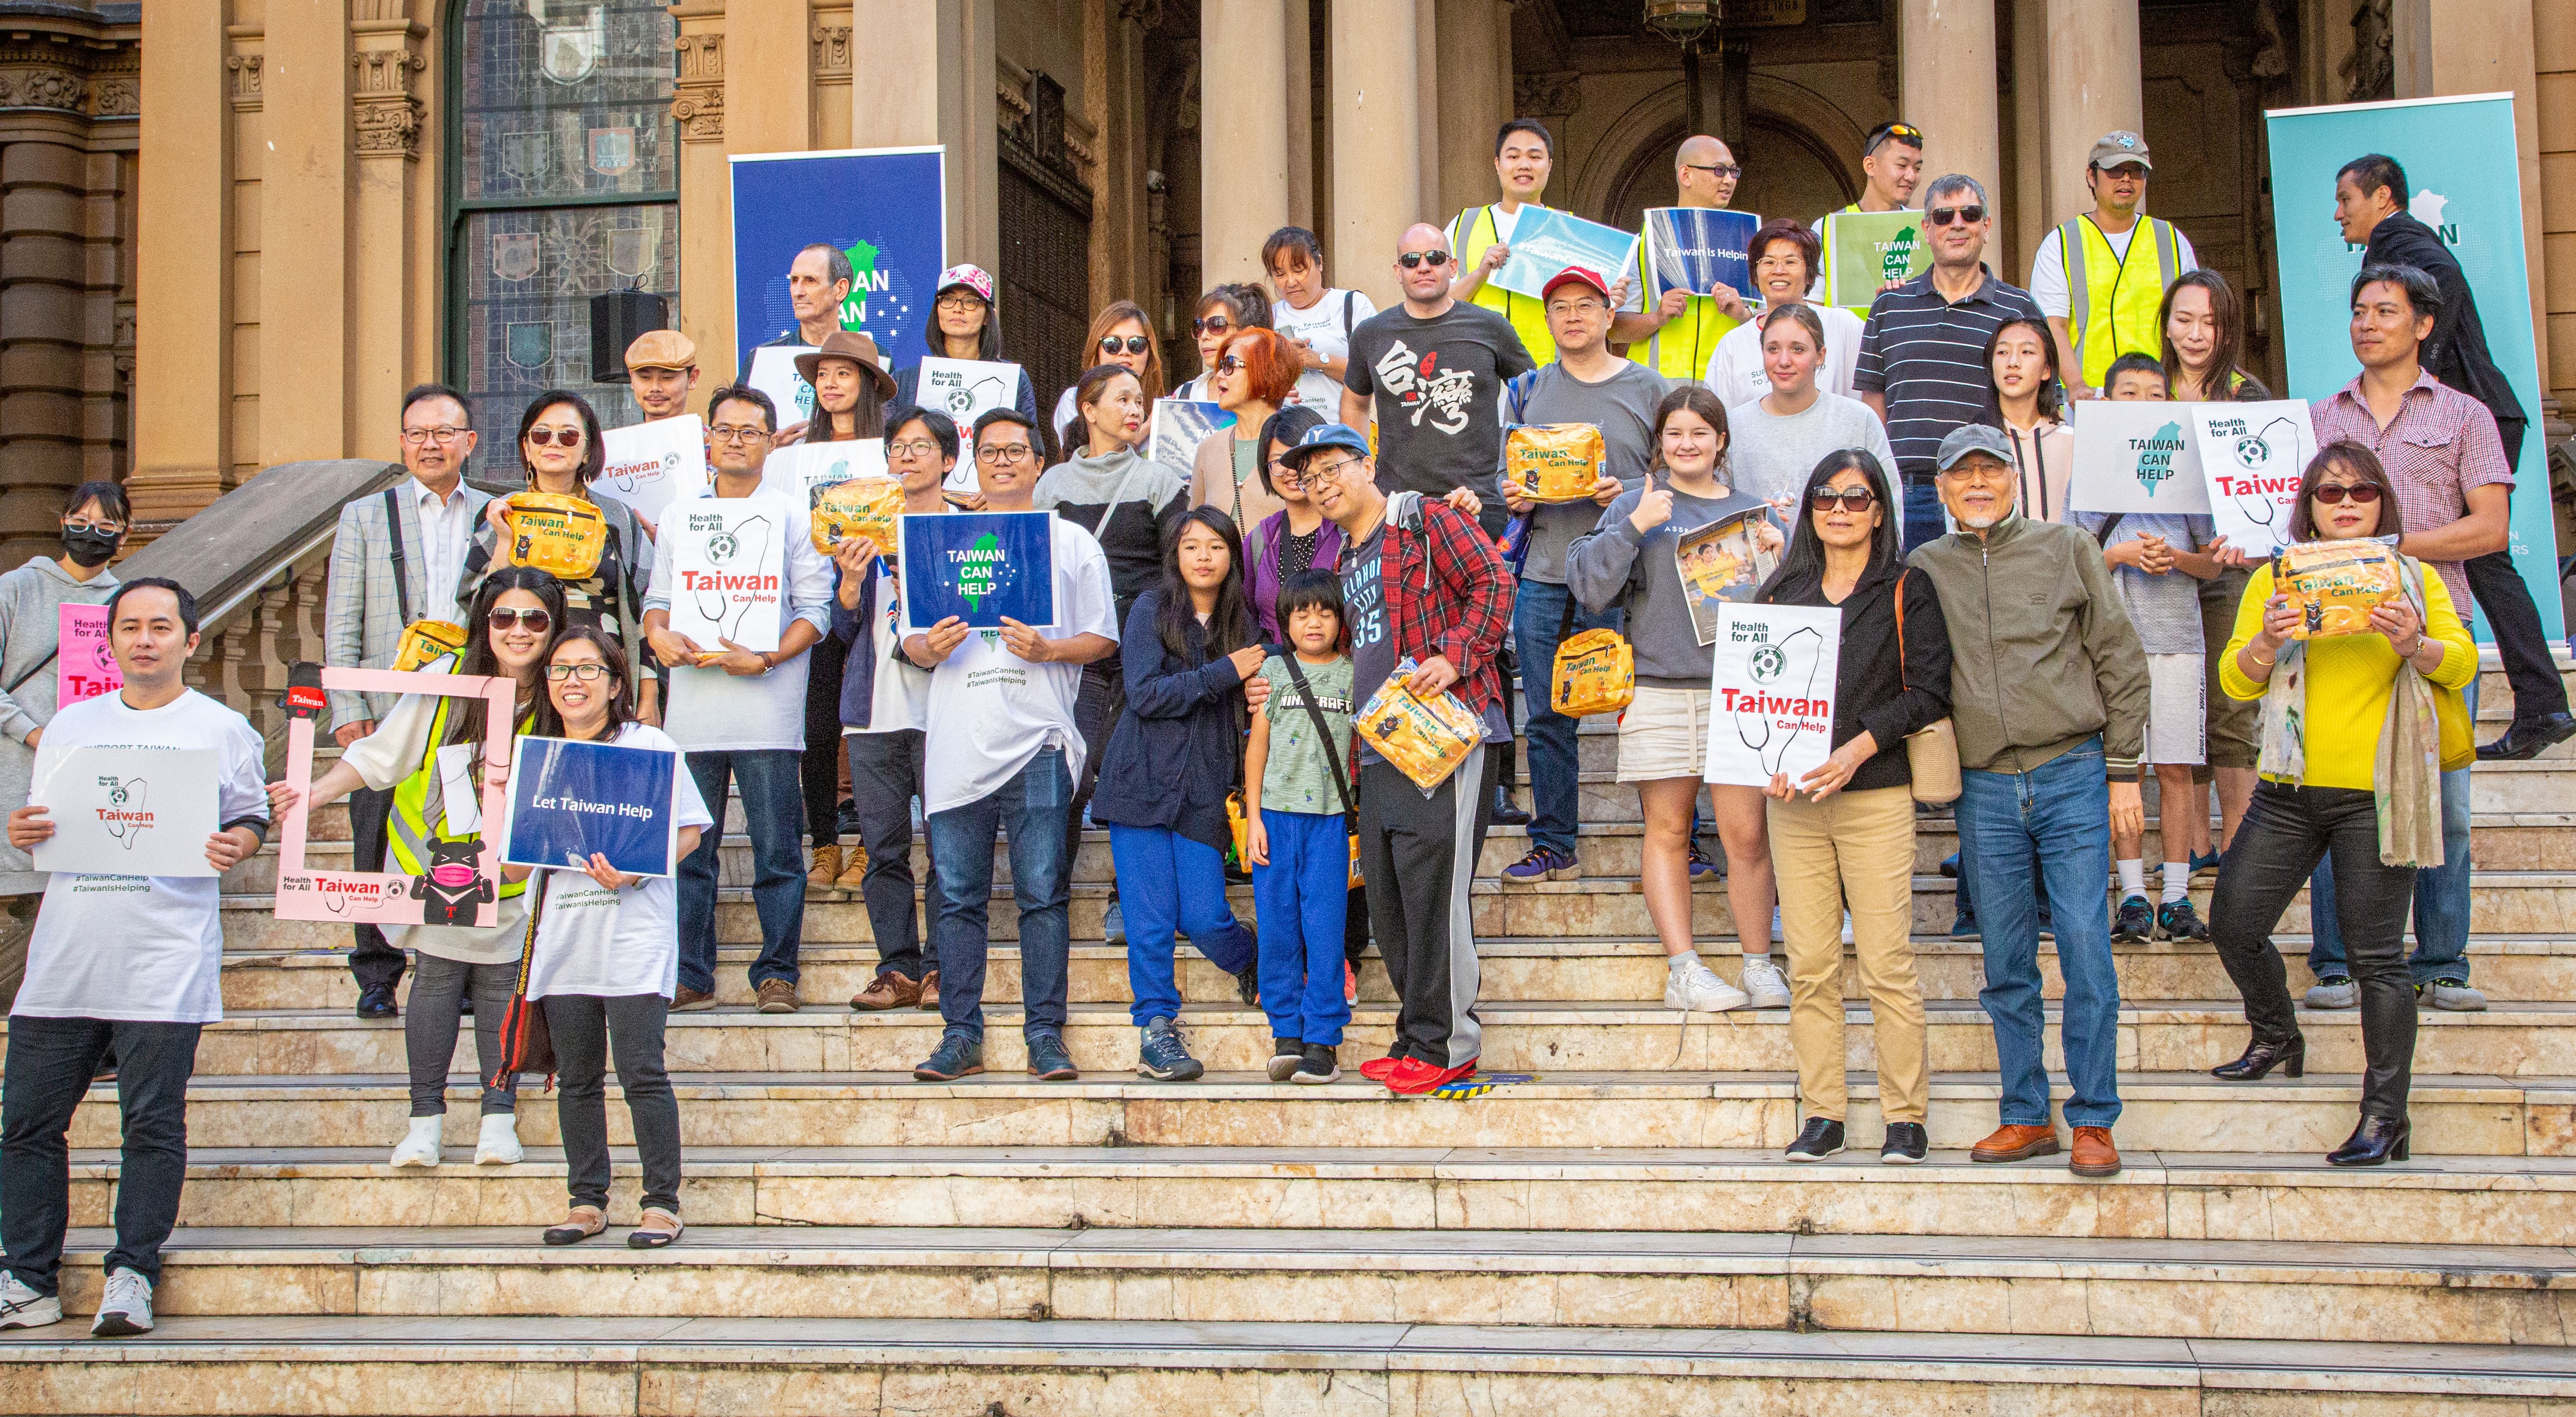 Members of the Taiwanese-Australian community rally in support of Taiwan joining the World Health Organization in May.